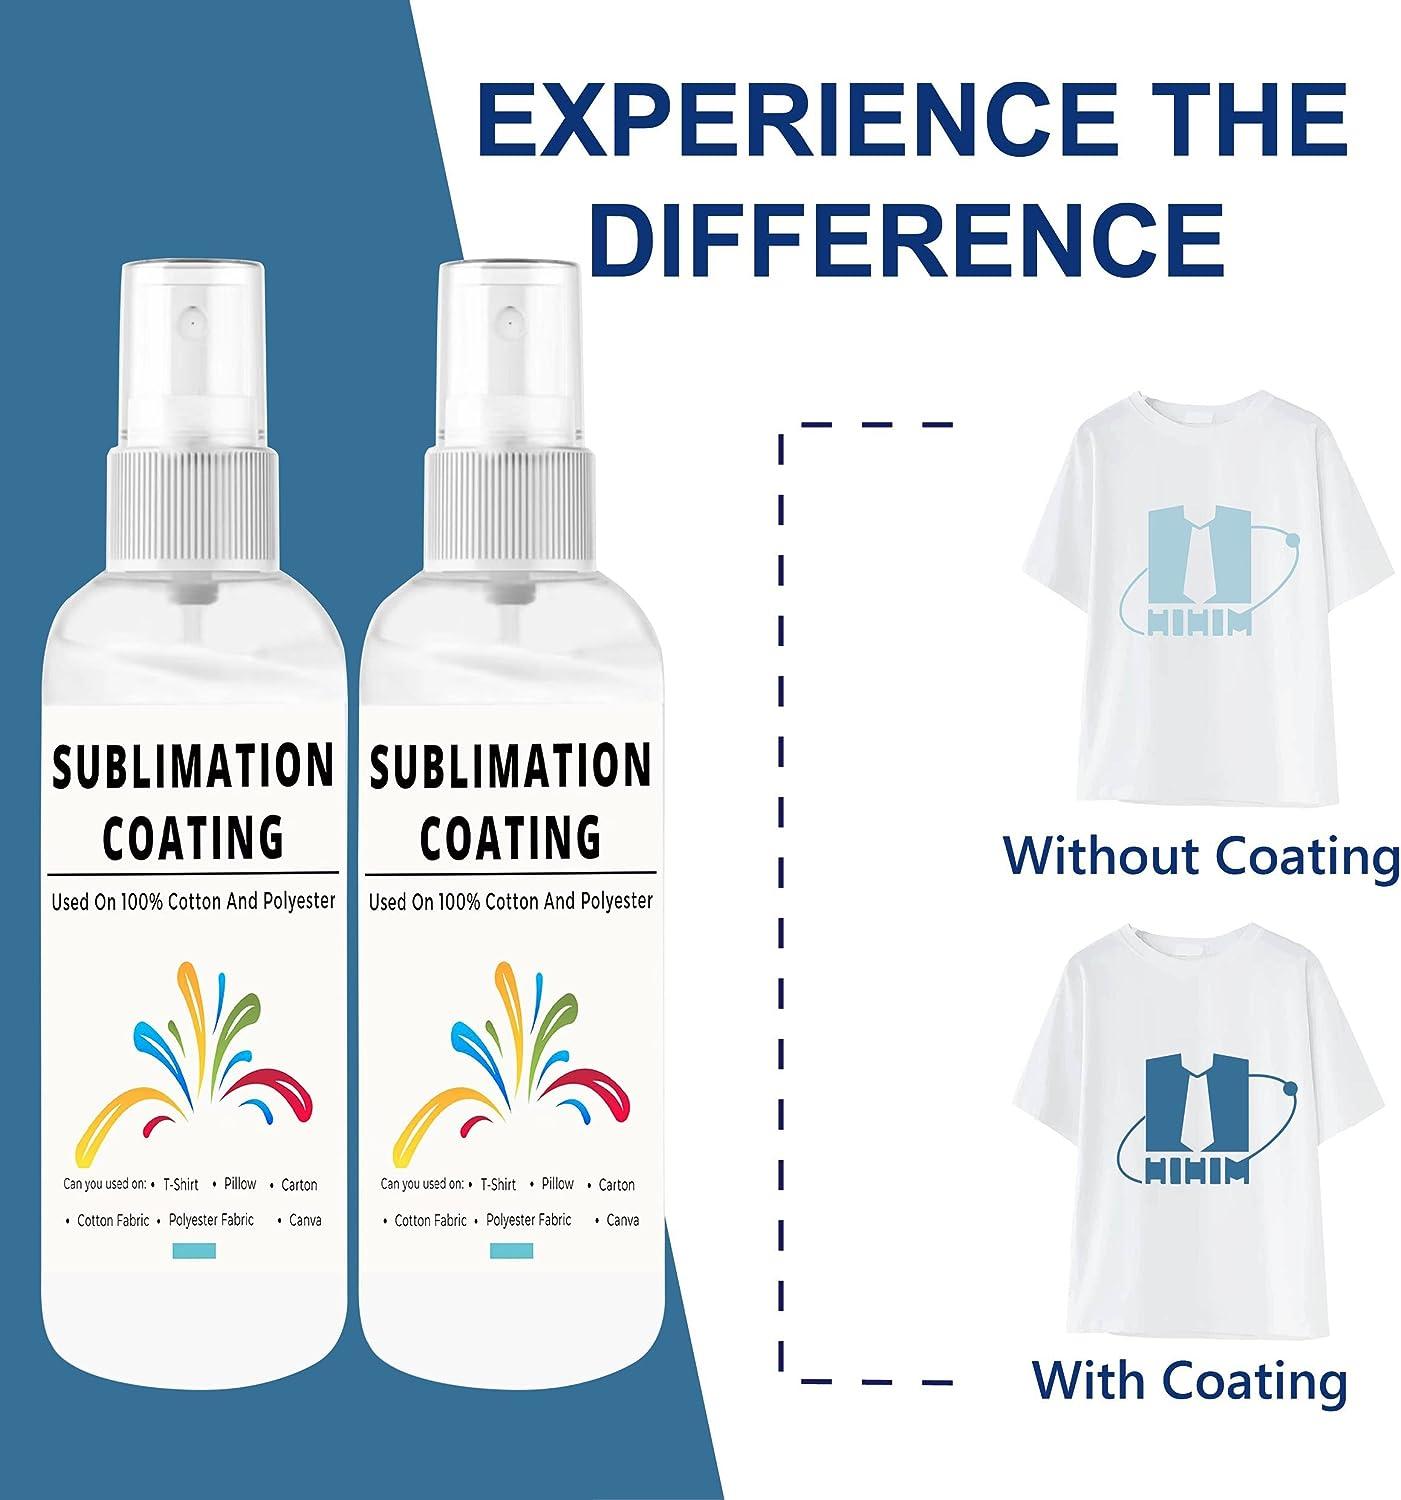 Sublimation Spray Sublimation Coating for Cotton Shirts Spray All Fabrics Including Polyester Carton Canvas Quick Drying and Super Adhesion Waterproof